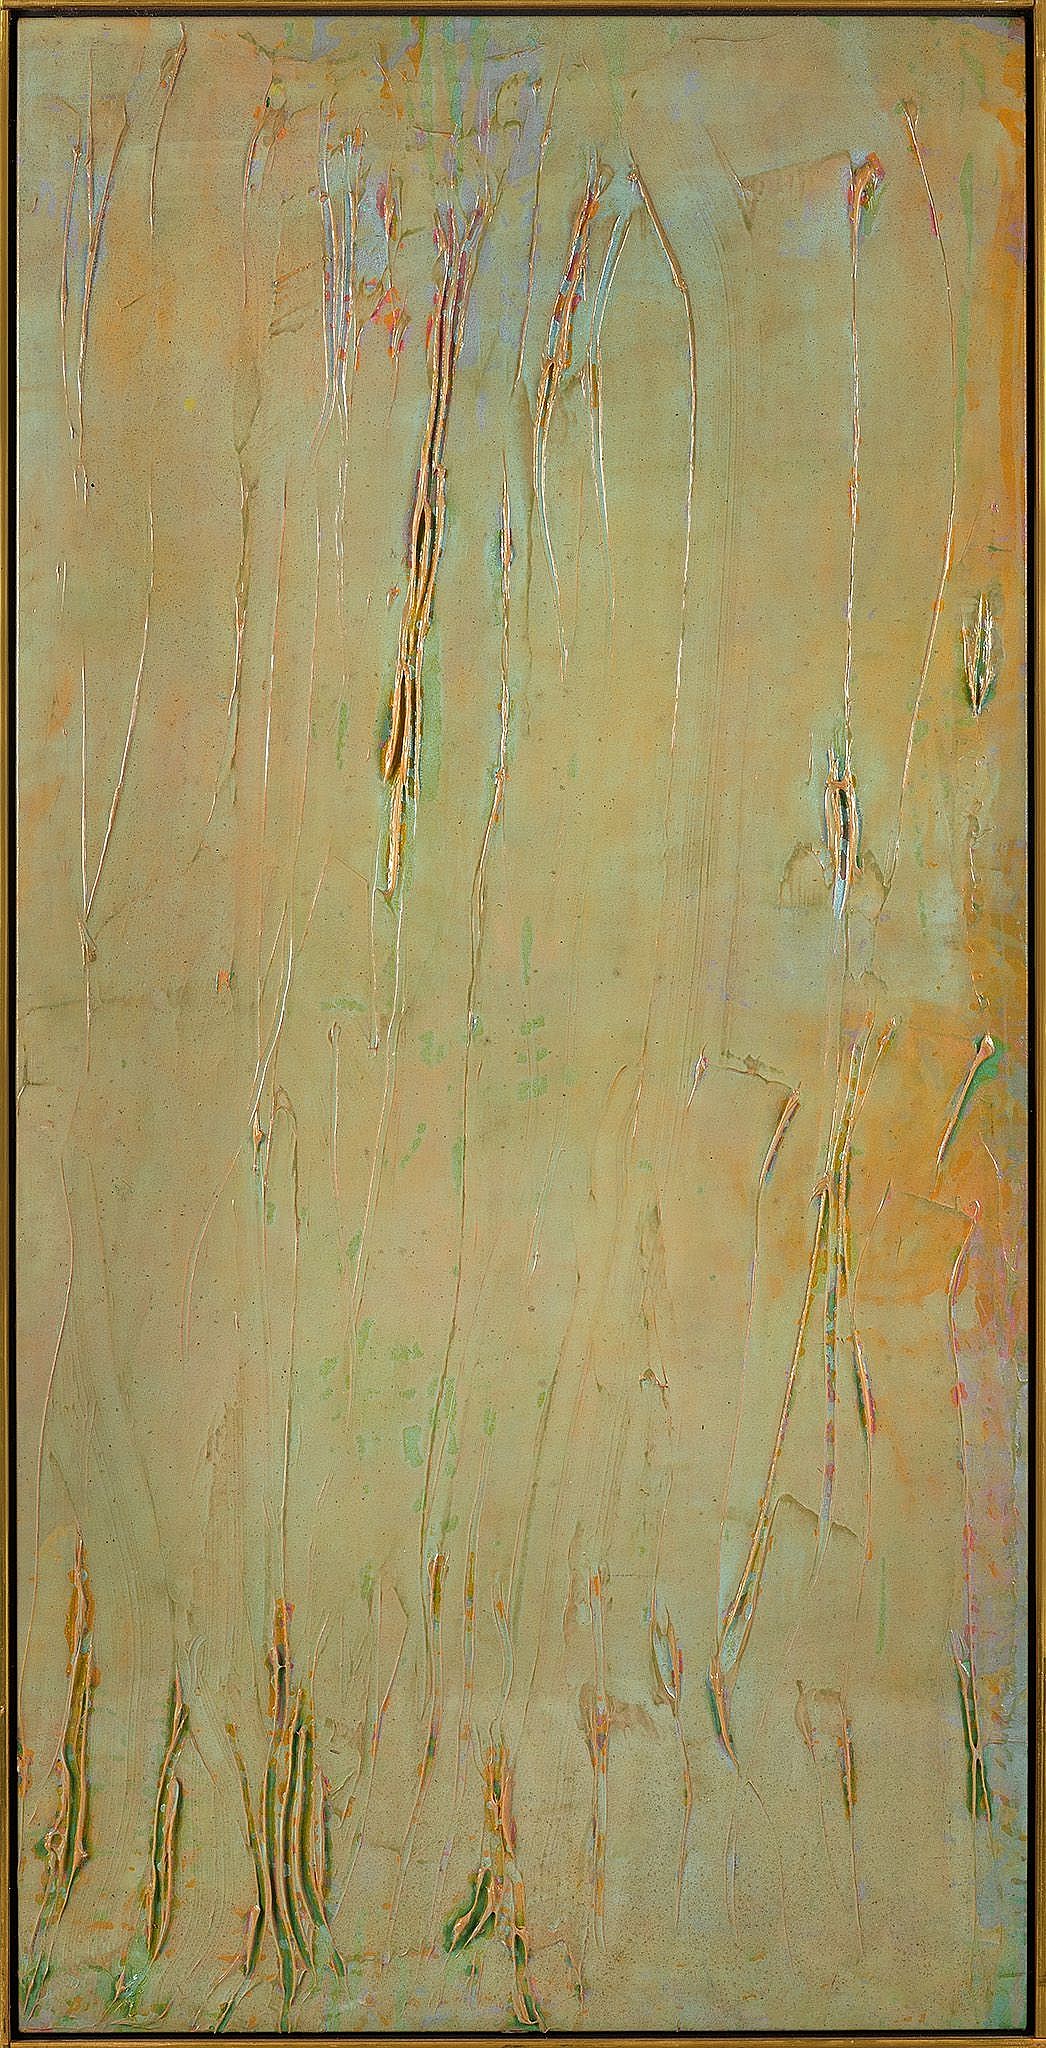 Walter Darby Bannard: See First. Name Later. (Paintings 1972 - 1976) Gallery Tour